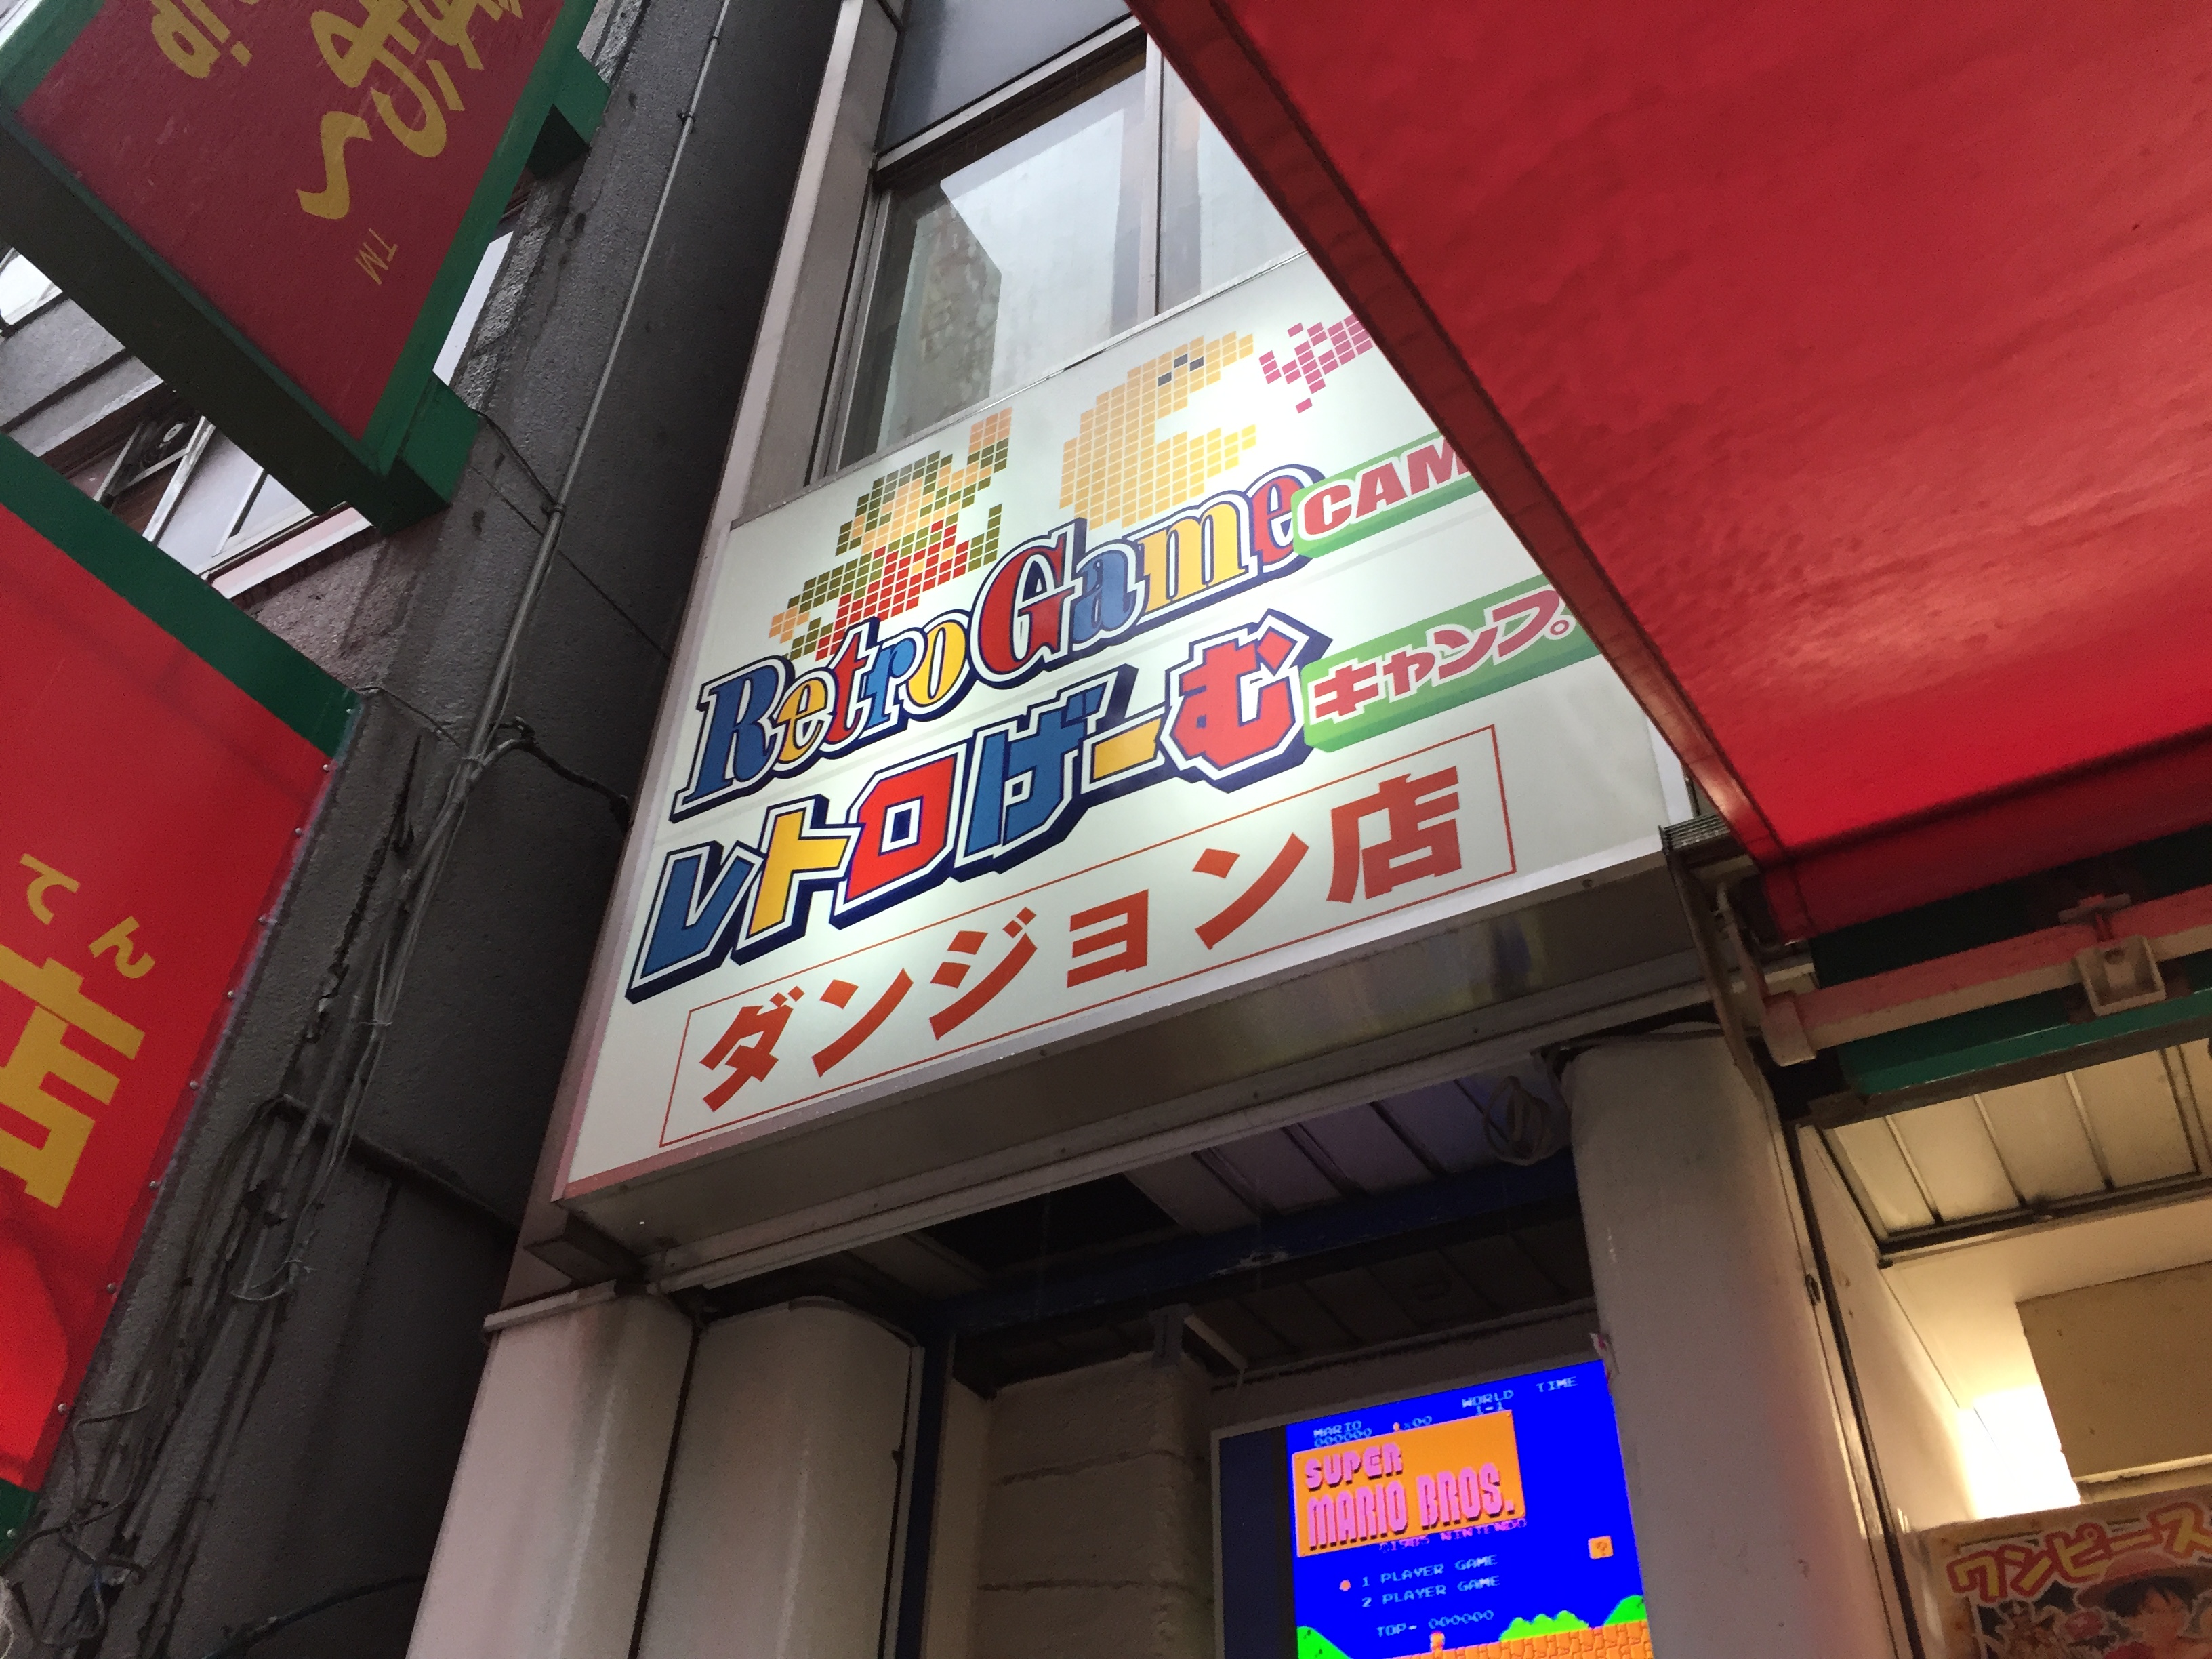 retro game stores nearby